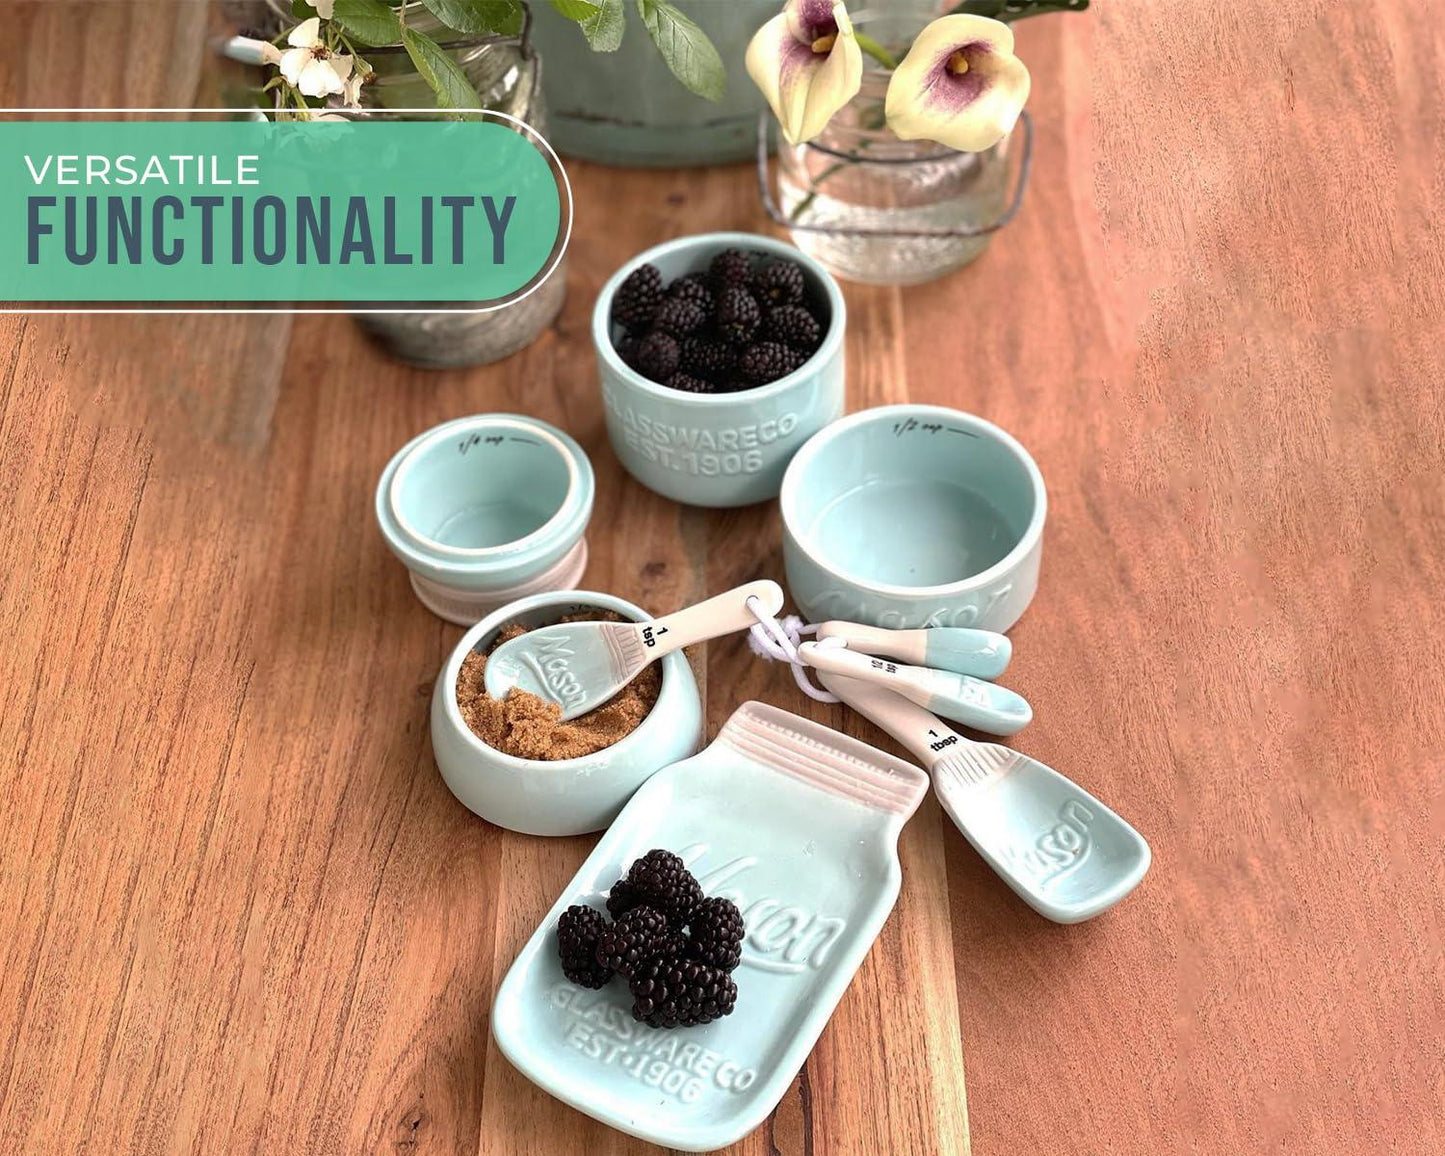 Vintage Mason Jar Kitchenware Set by Comfify - Multi-Piece Kitchen Ceramic Décor Set w/ 4 Measuring Cups, 4 Measuring Spoons and Spoon Rest - Attractive Vintage Style, in Aqua Blue Embossed Ceramic - CookCave